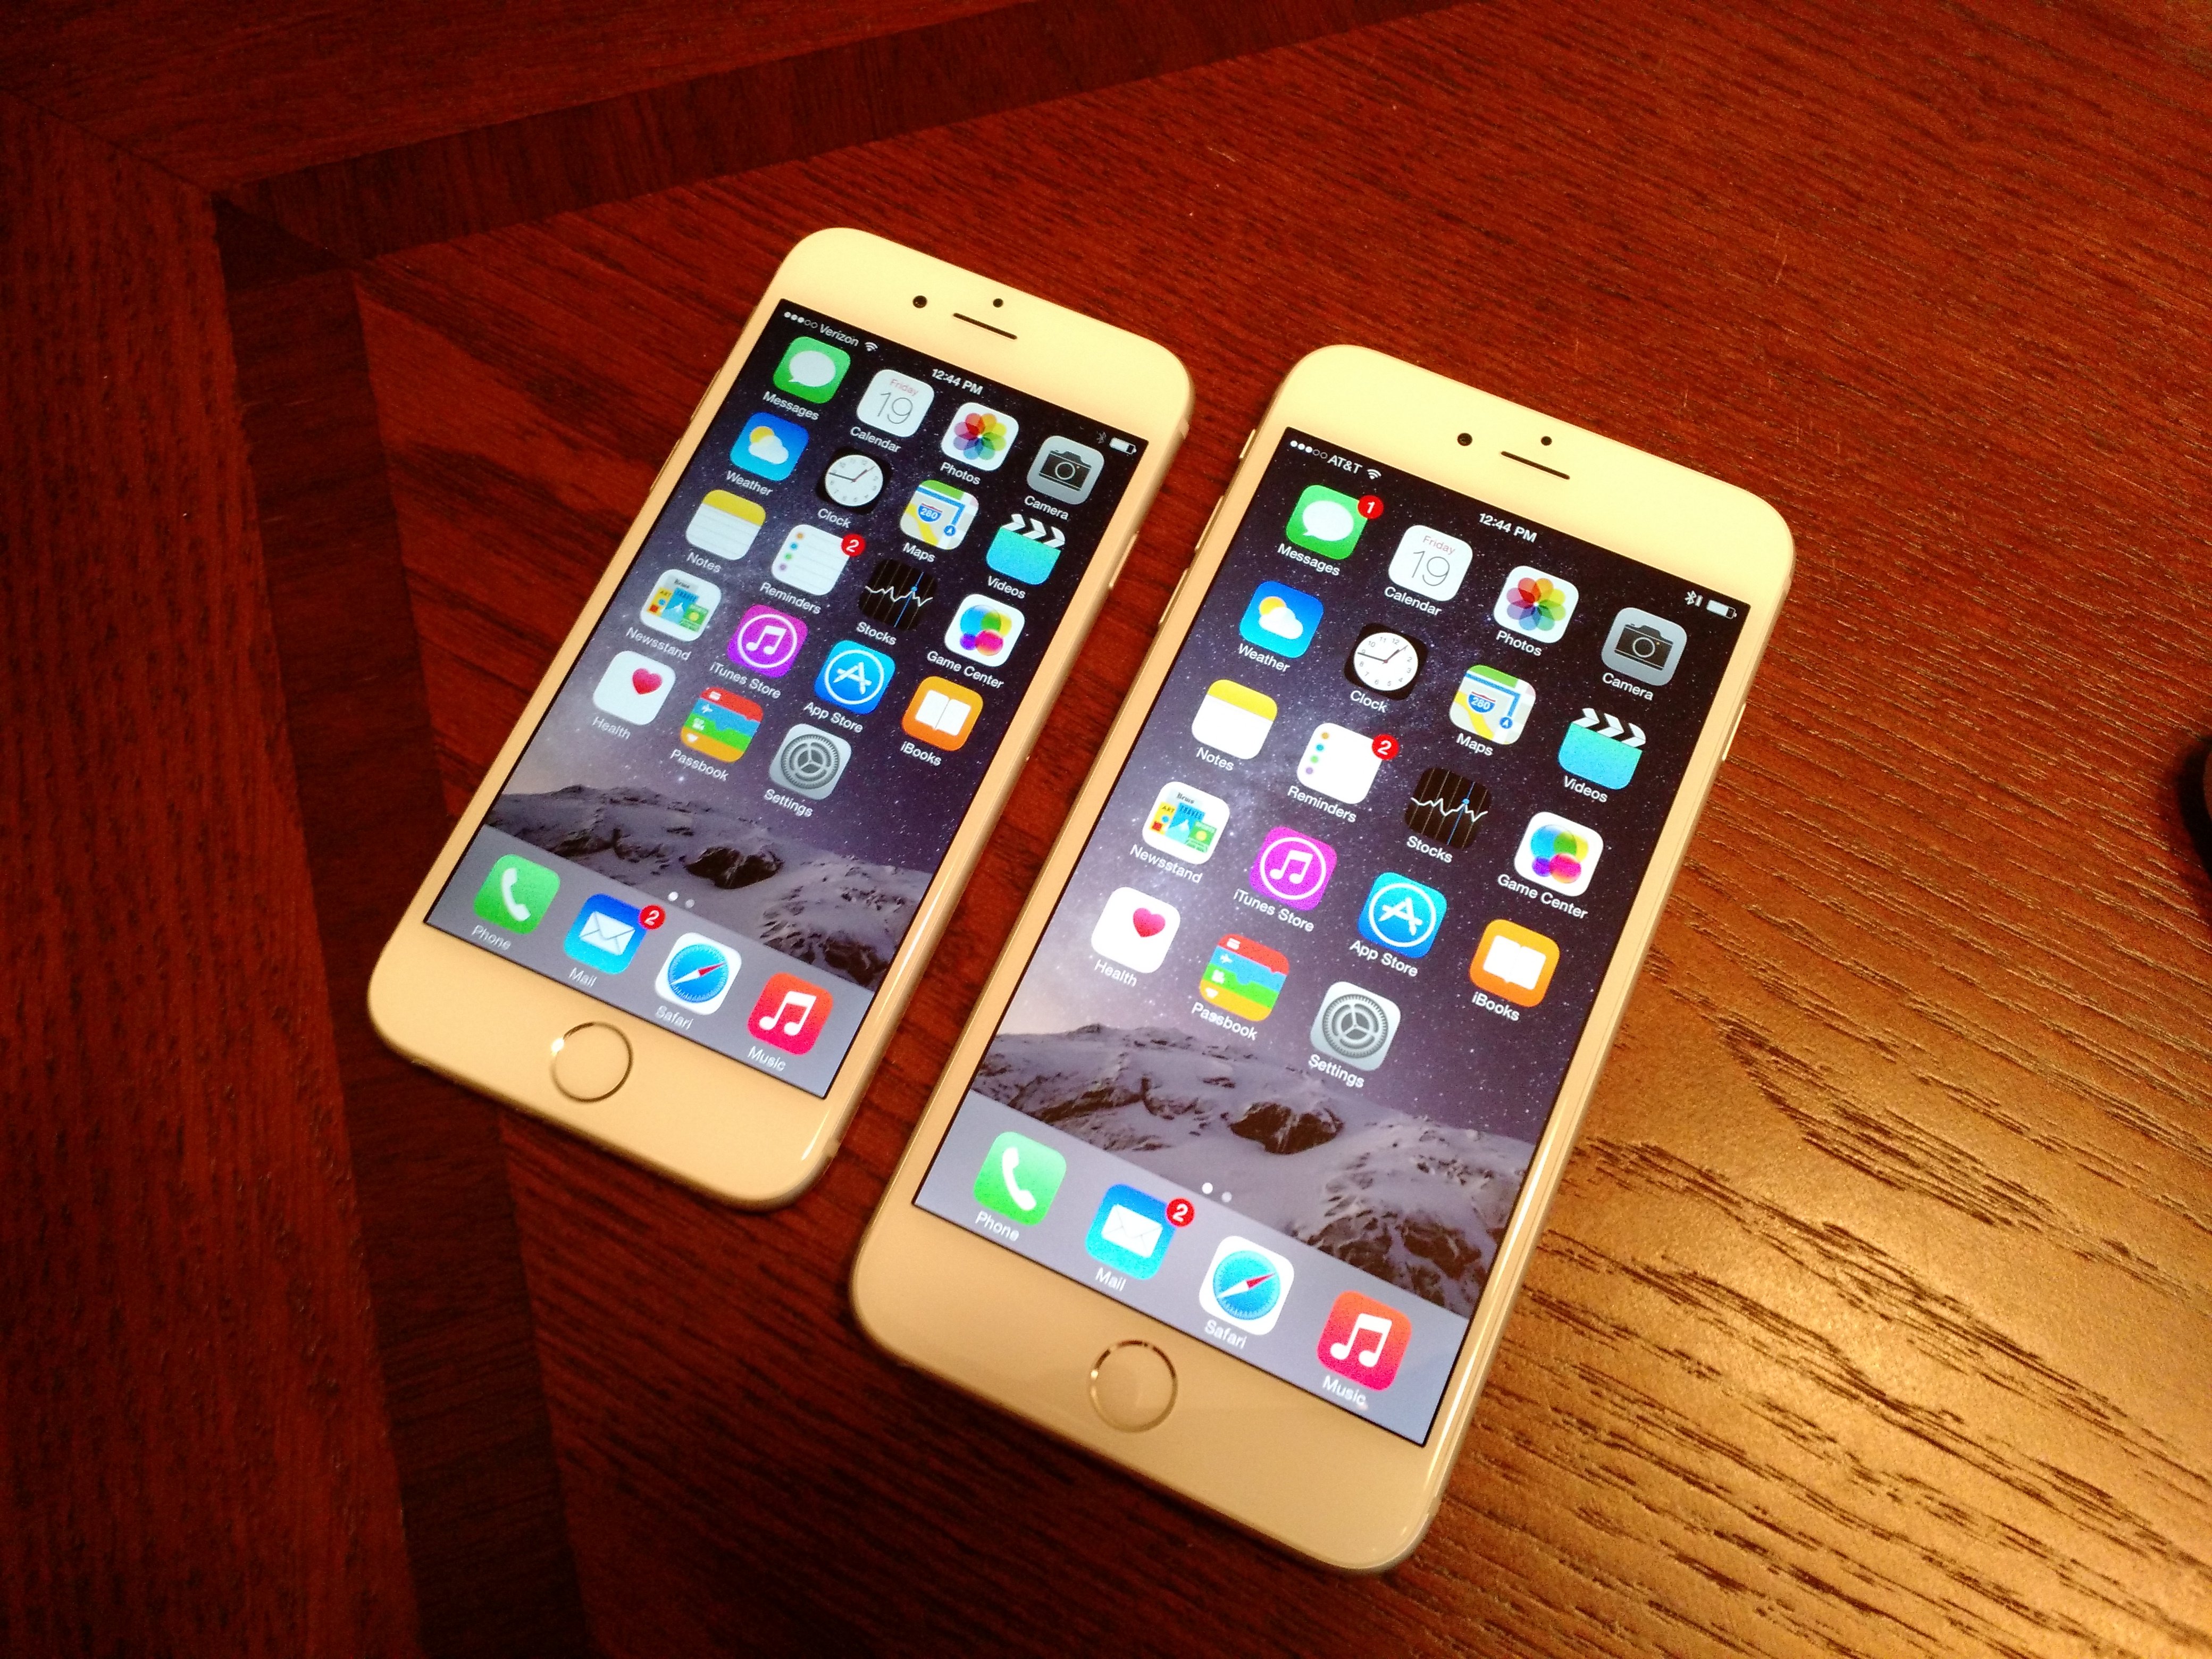 Here are the iPhone 6 deals you need to know about, many of which end soon.